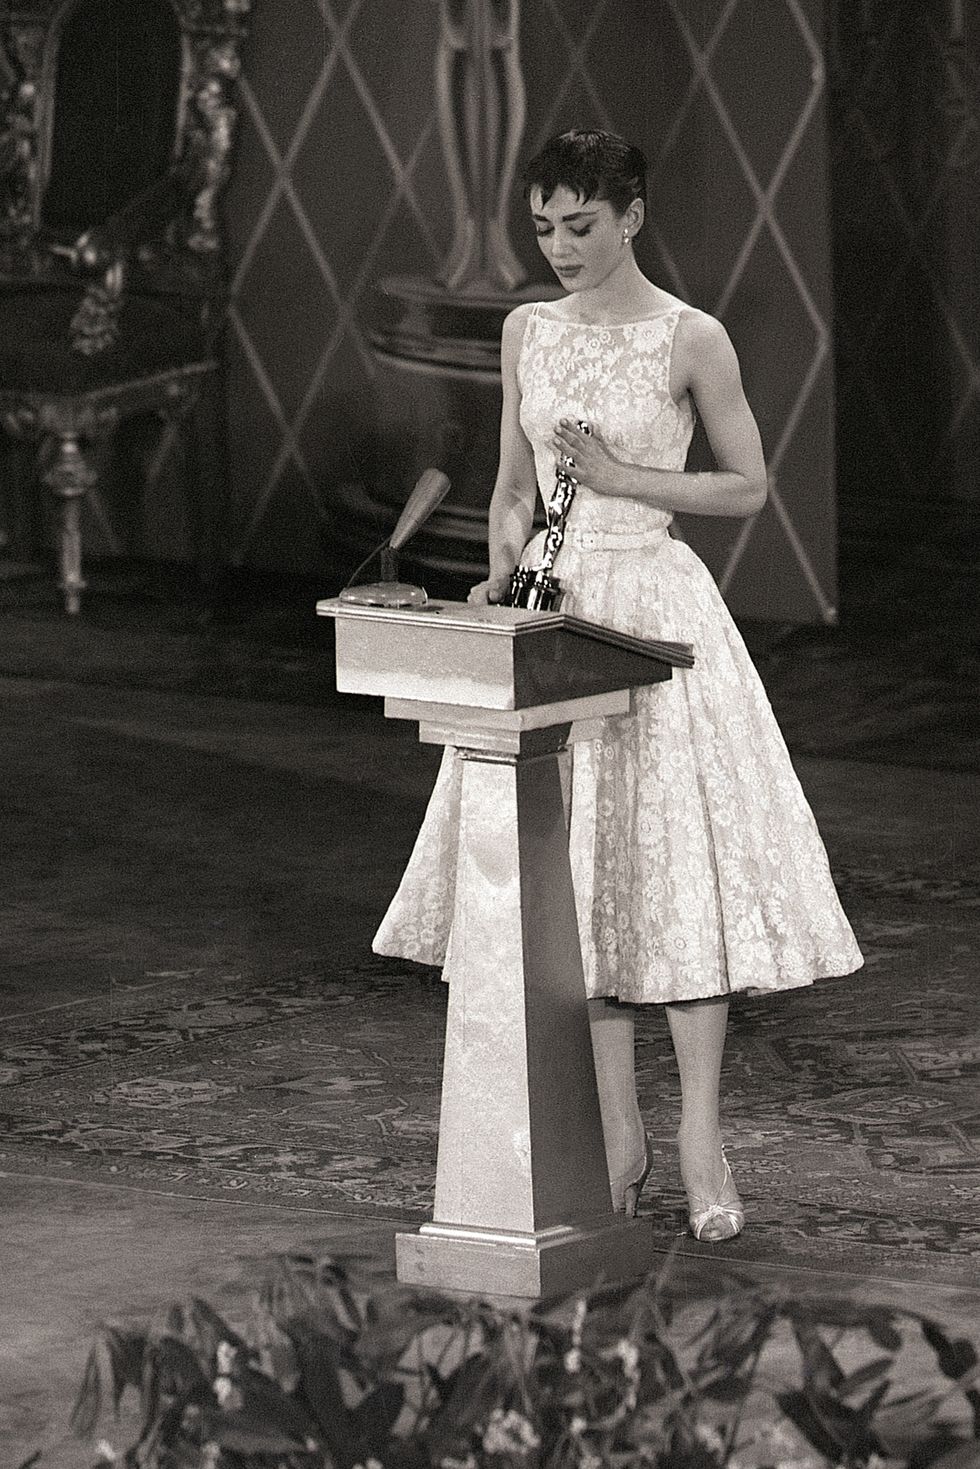 original caption 3251954 new york  audrey hepburn smiles sweetly as she receives hollywood's highest accolade  an oscar for the best performance by an actress  from jean hersholt at the center theater tonight the 22 year old stage and screen star won her award for her only american film, "roman holiday"